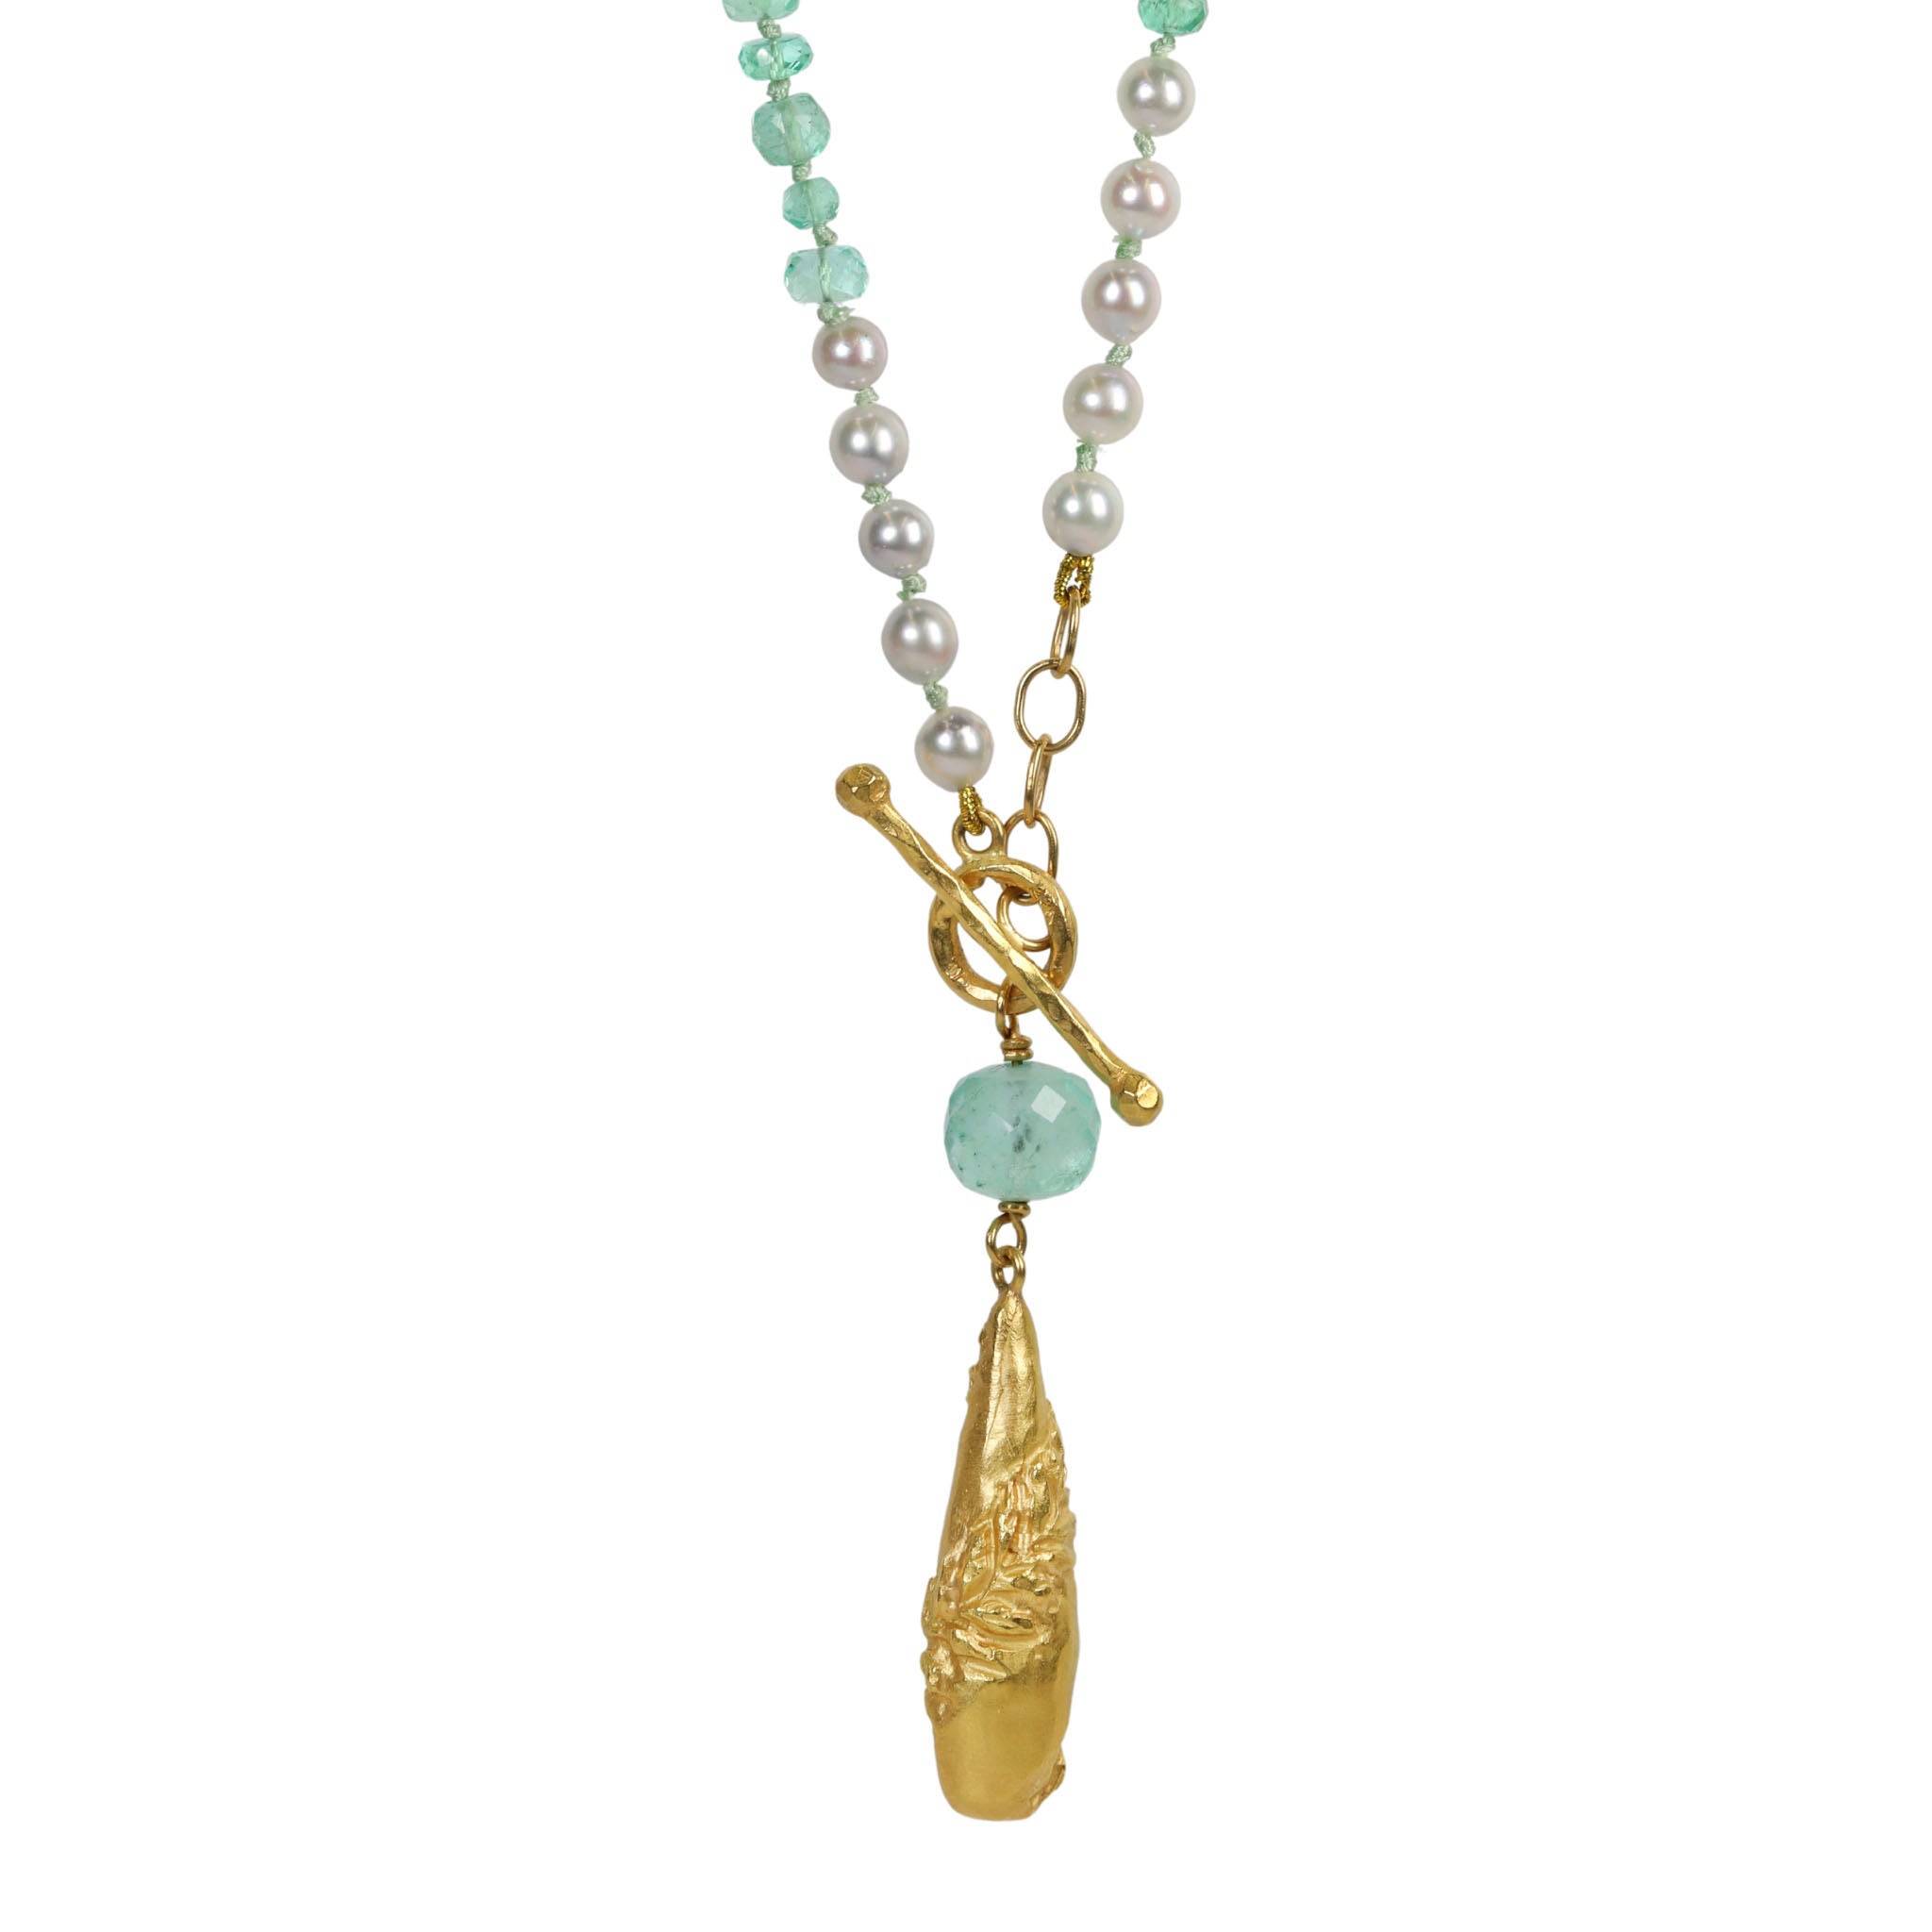 Emerald &amp; Pearl Beaded Necklace with Vine-Wrapped Breaulette Pendant - Peridot Fine Jewelry - Cathy Waterman